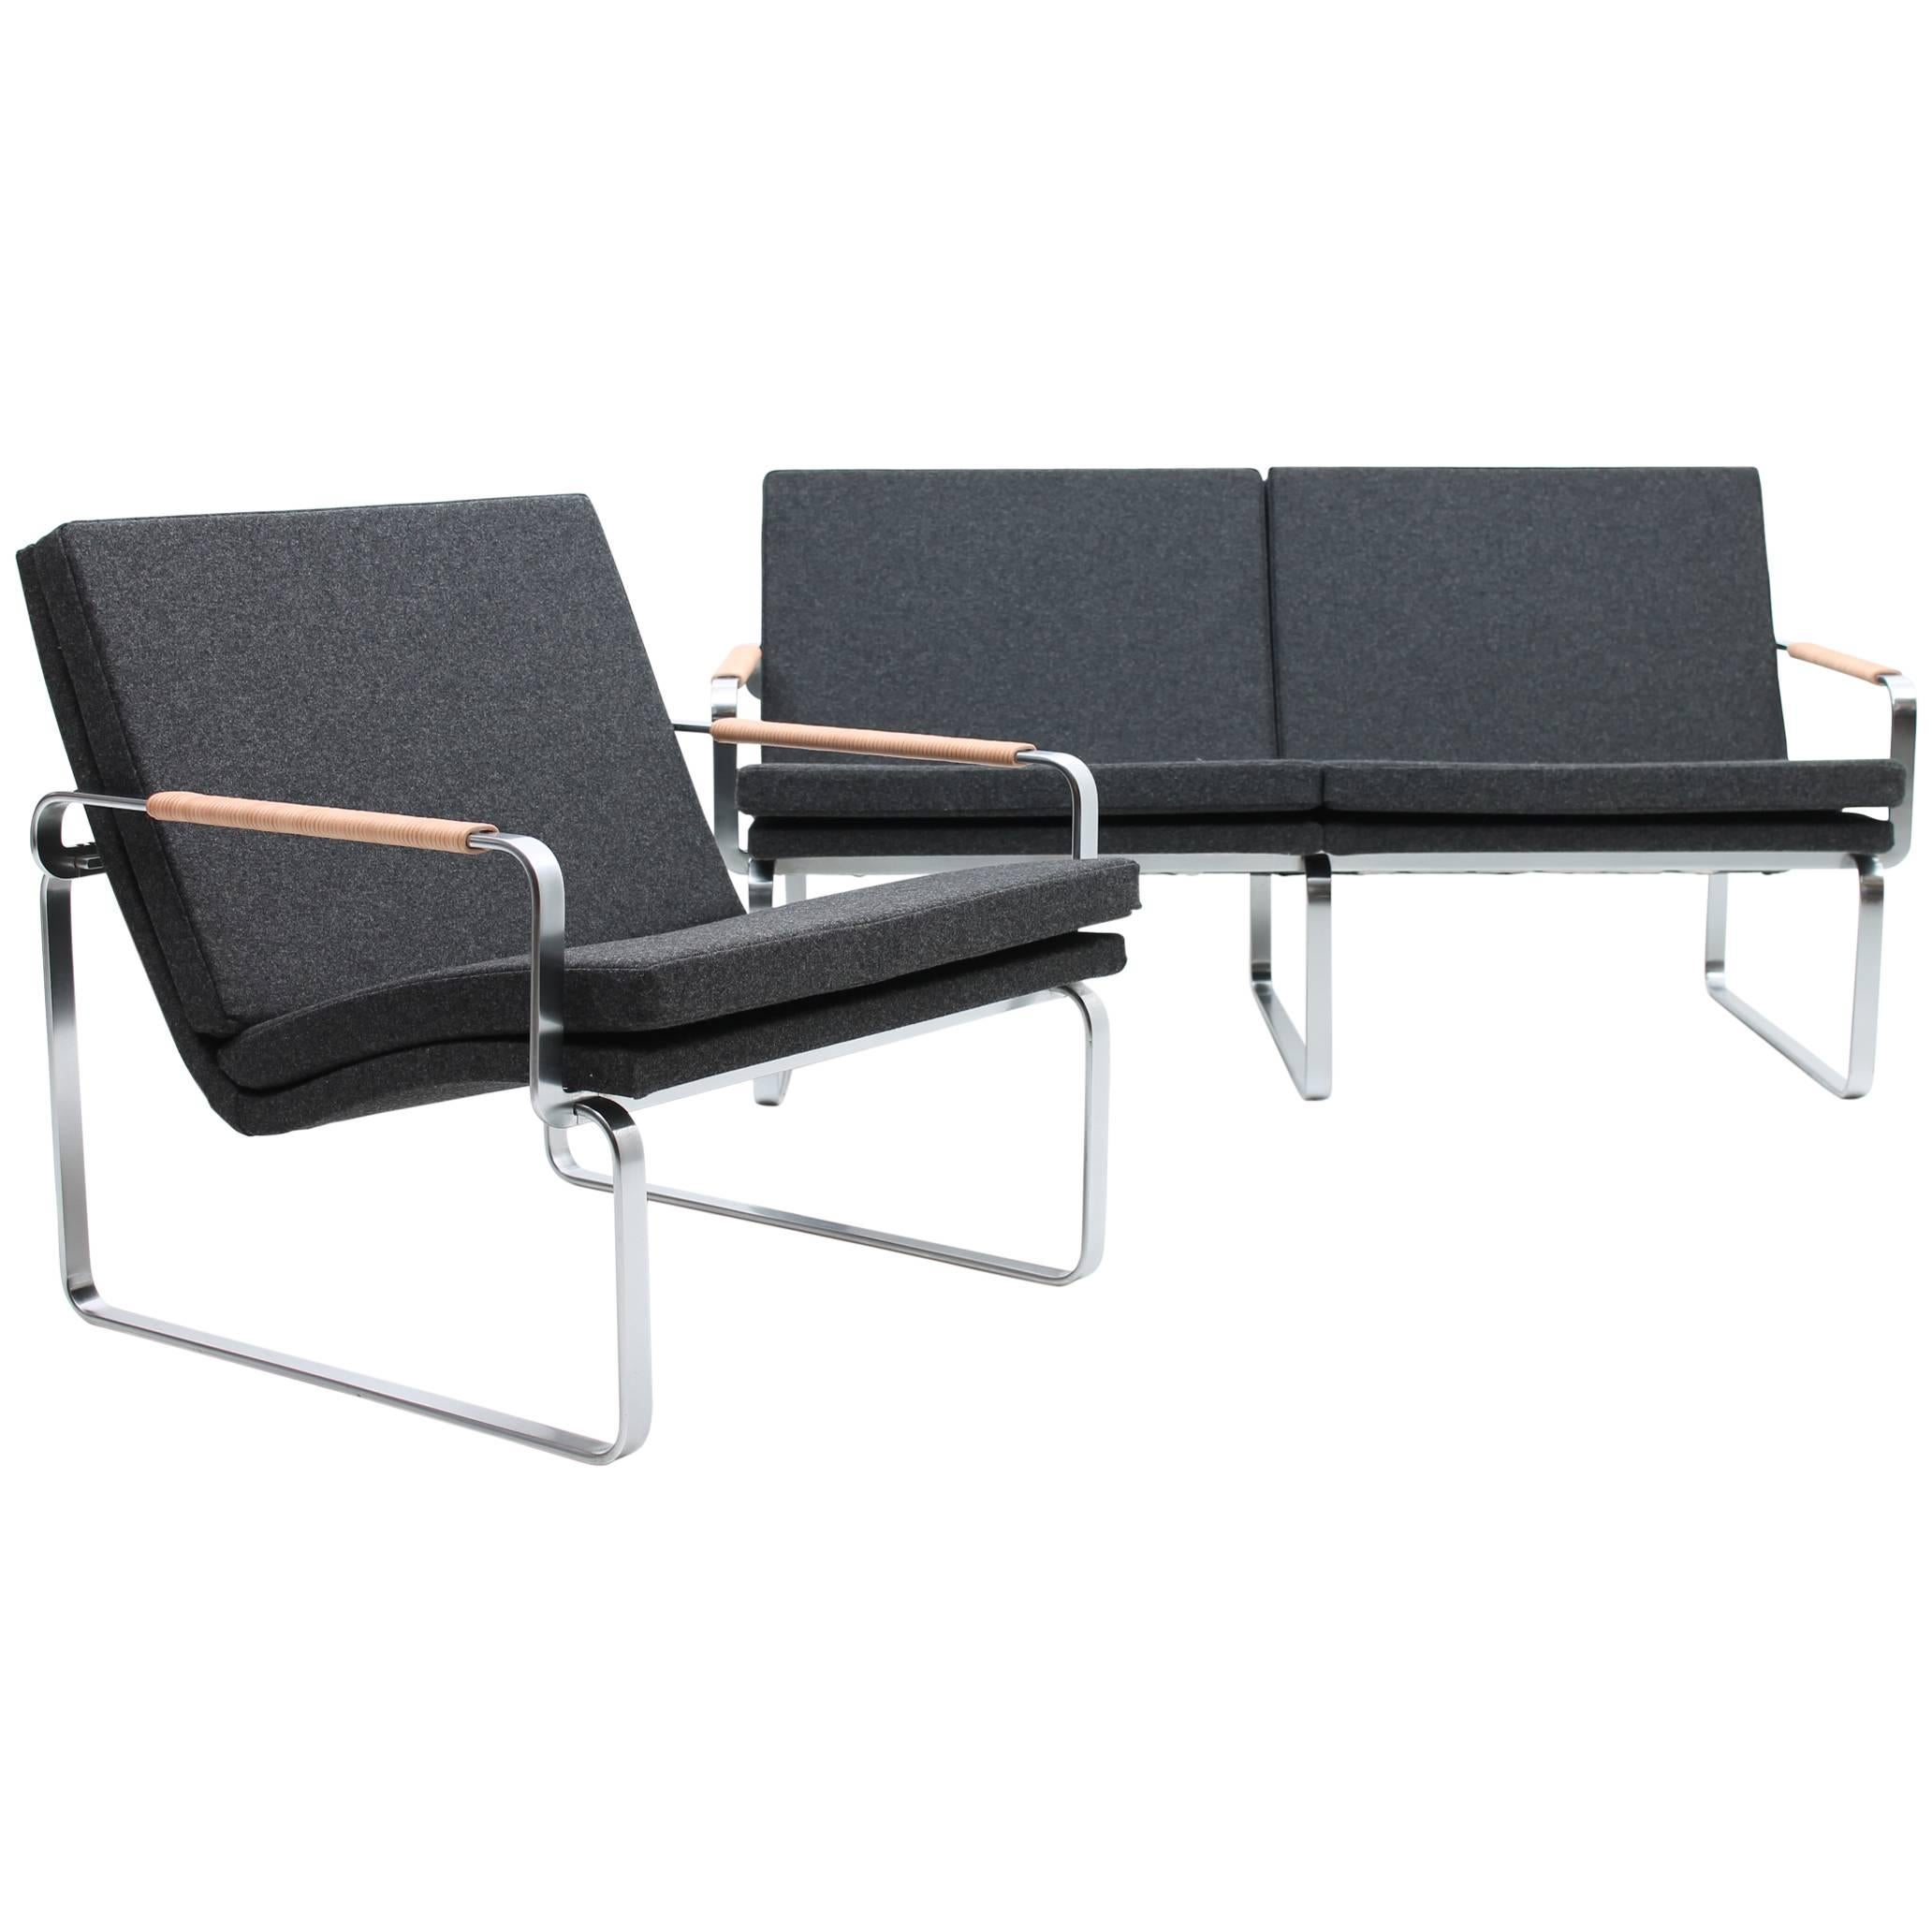 Rare Charcoal Gray Sofa and Chair Set by J.Lund & O. Larsen for Bo-Ex BO-911 For Sale